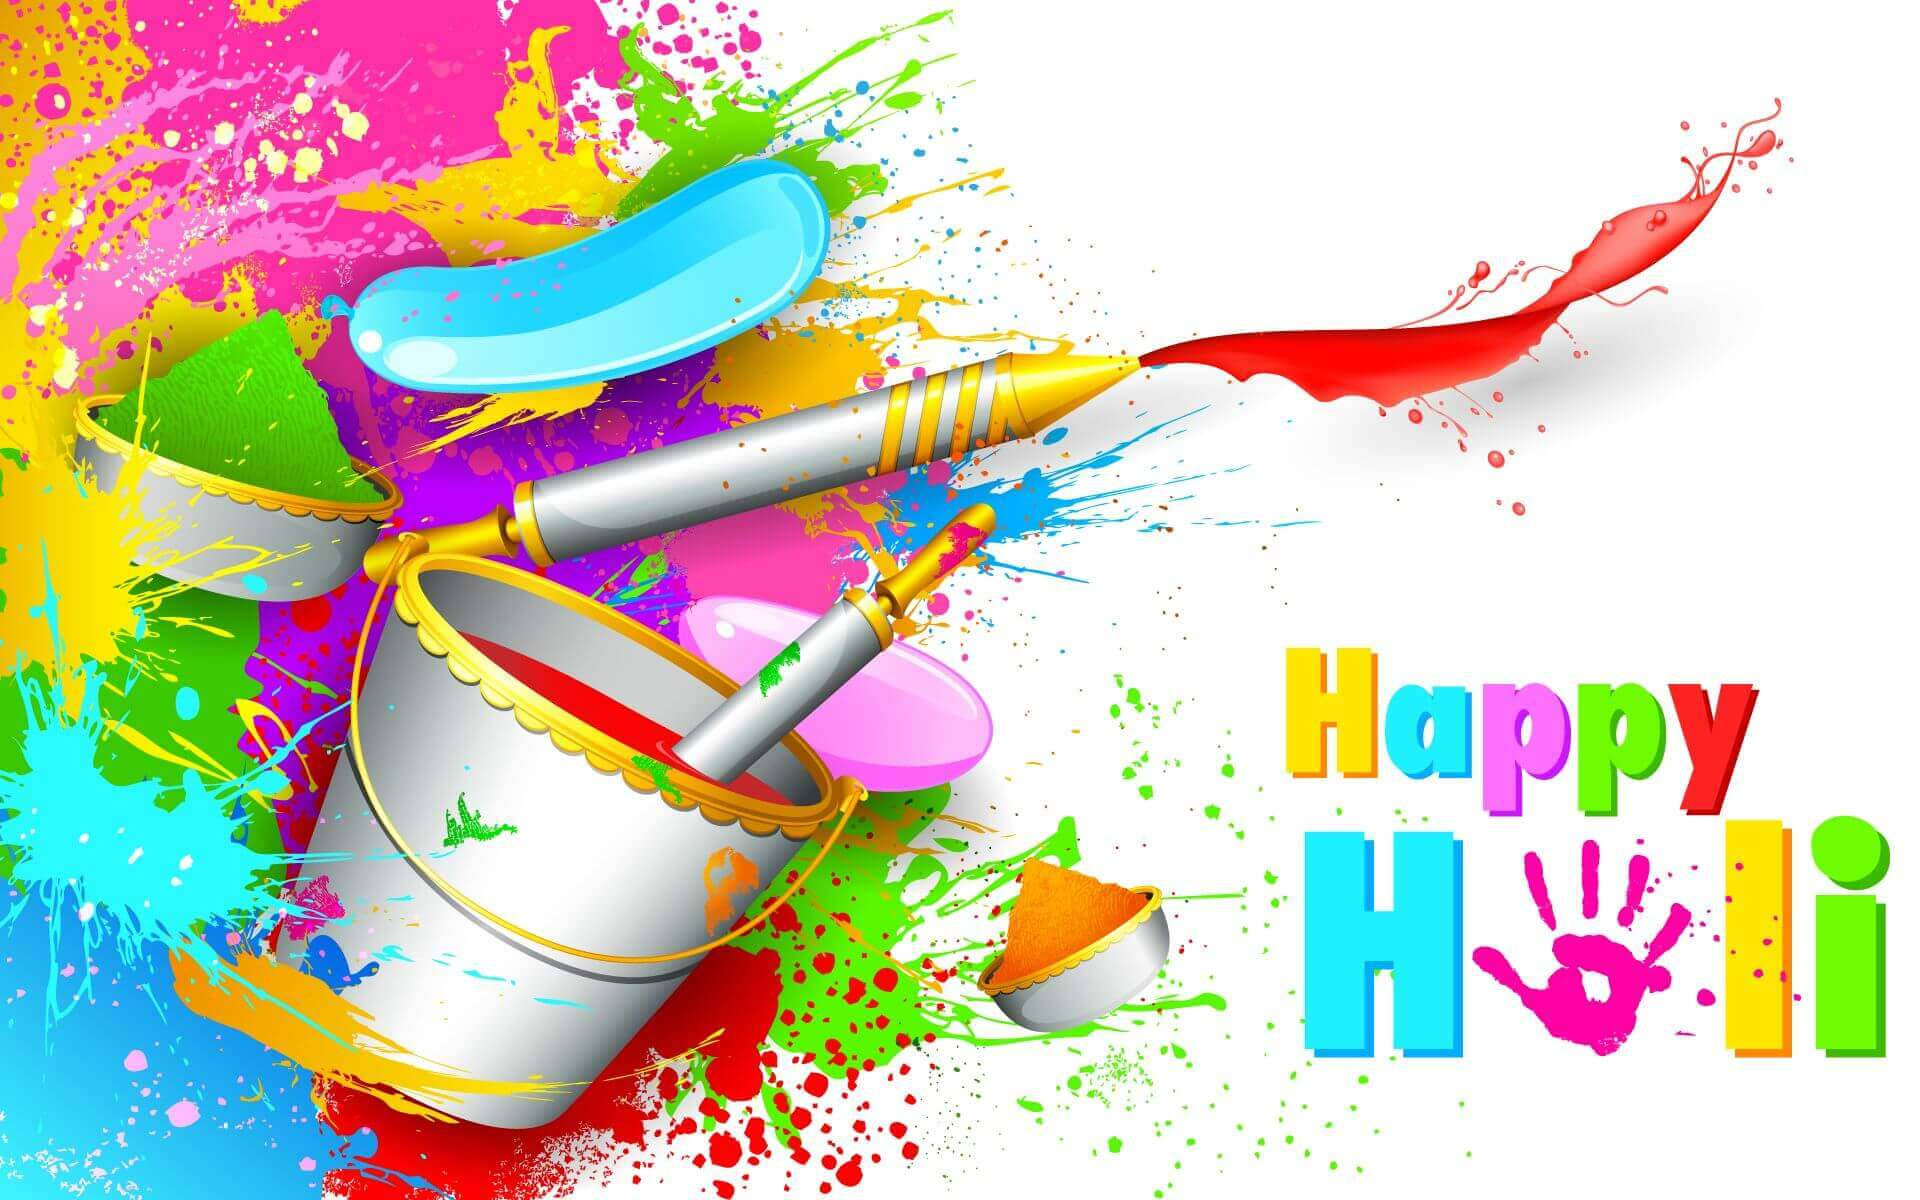 Happy Holi Images 2020 Wishes Quotes Whatsapp Images Status Messages  GIF Pics Photos Msg Shayari HD Wallpapers